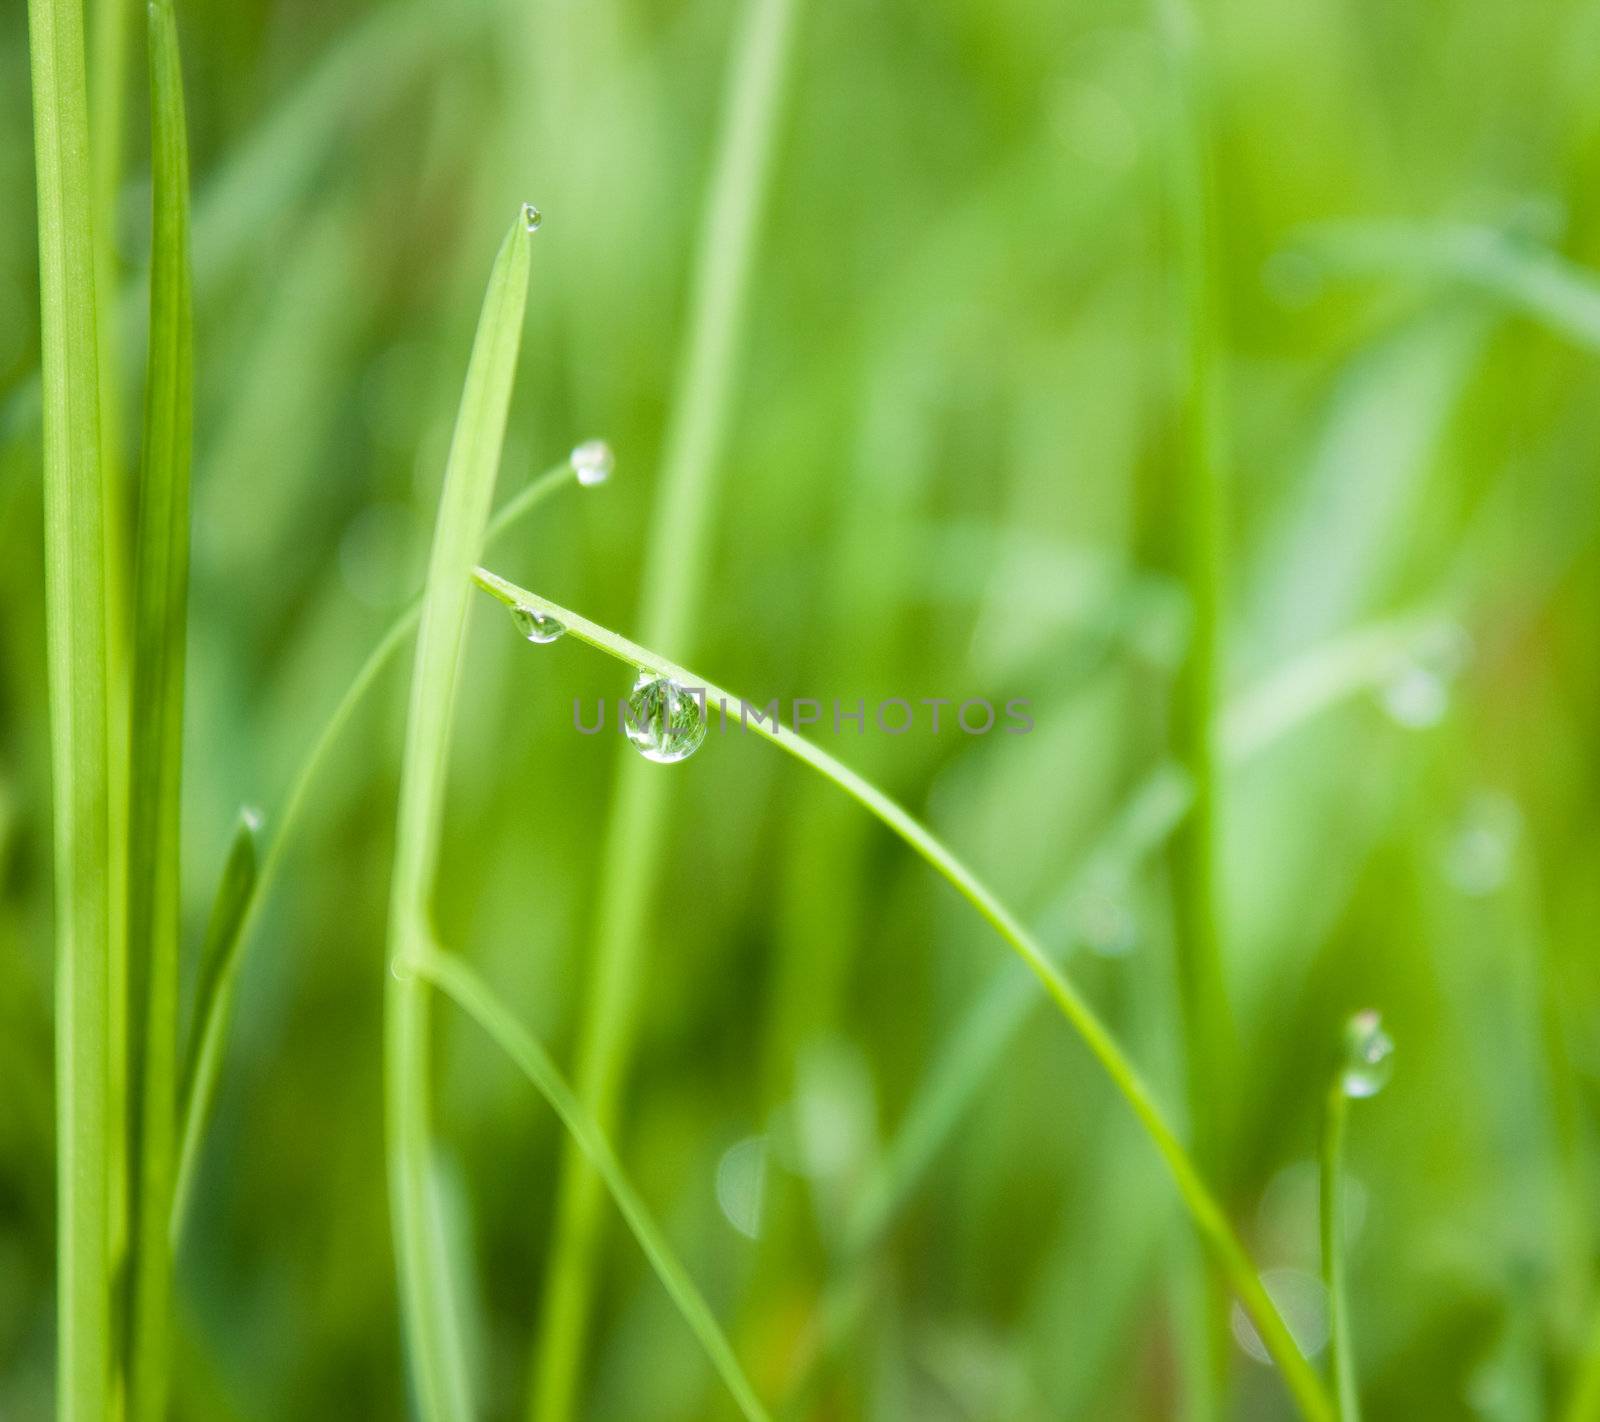 Water droplets on a grass, shallow dof